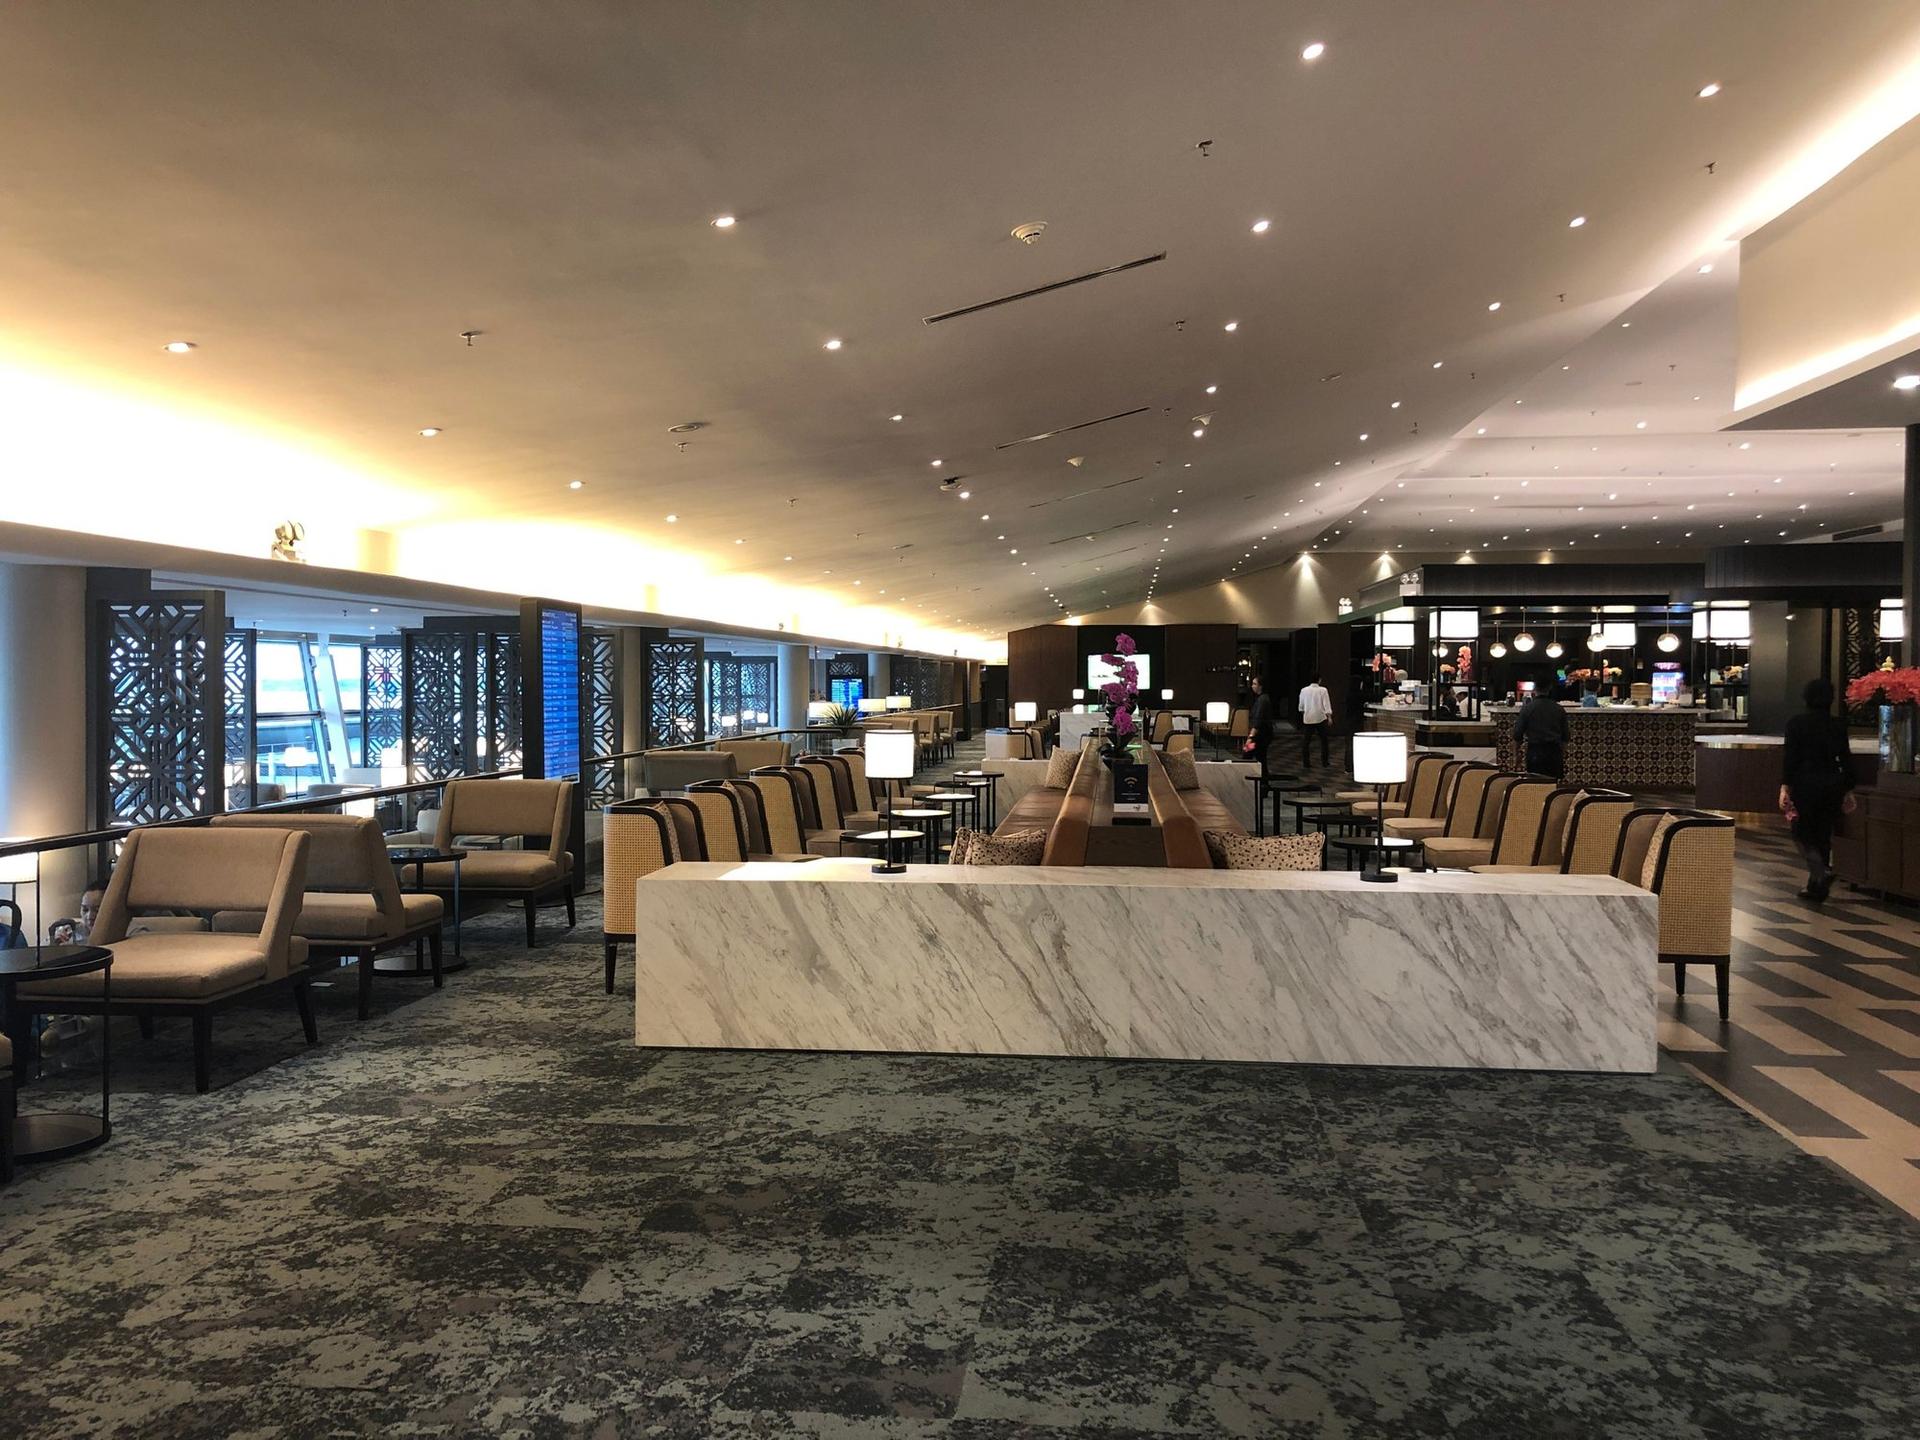 Malaysia Airlines Golden Business Class Lounge image 21 of 27